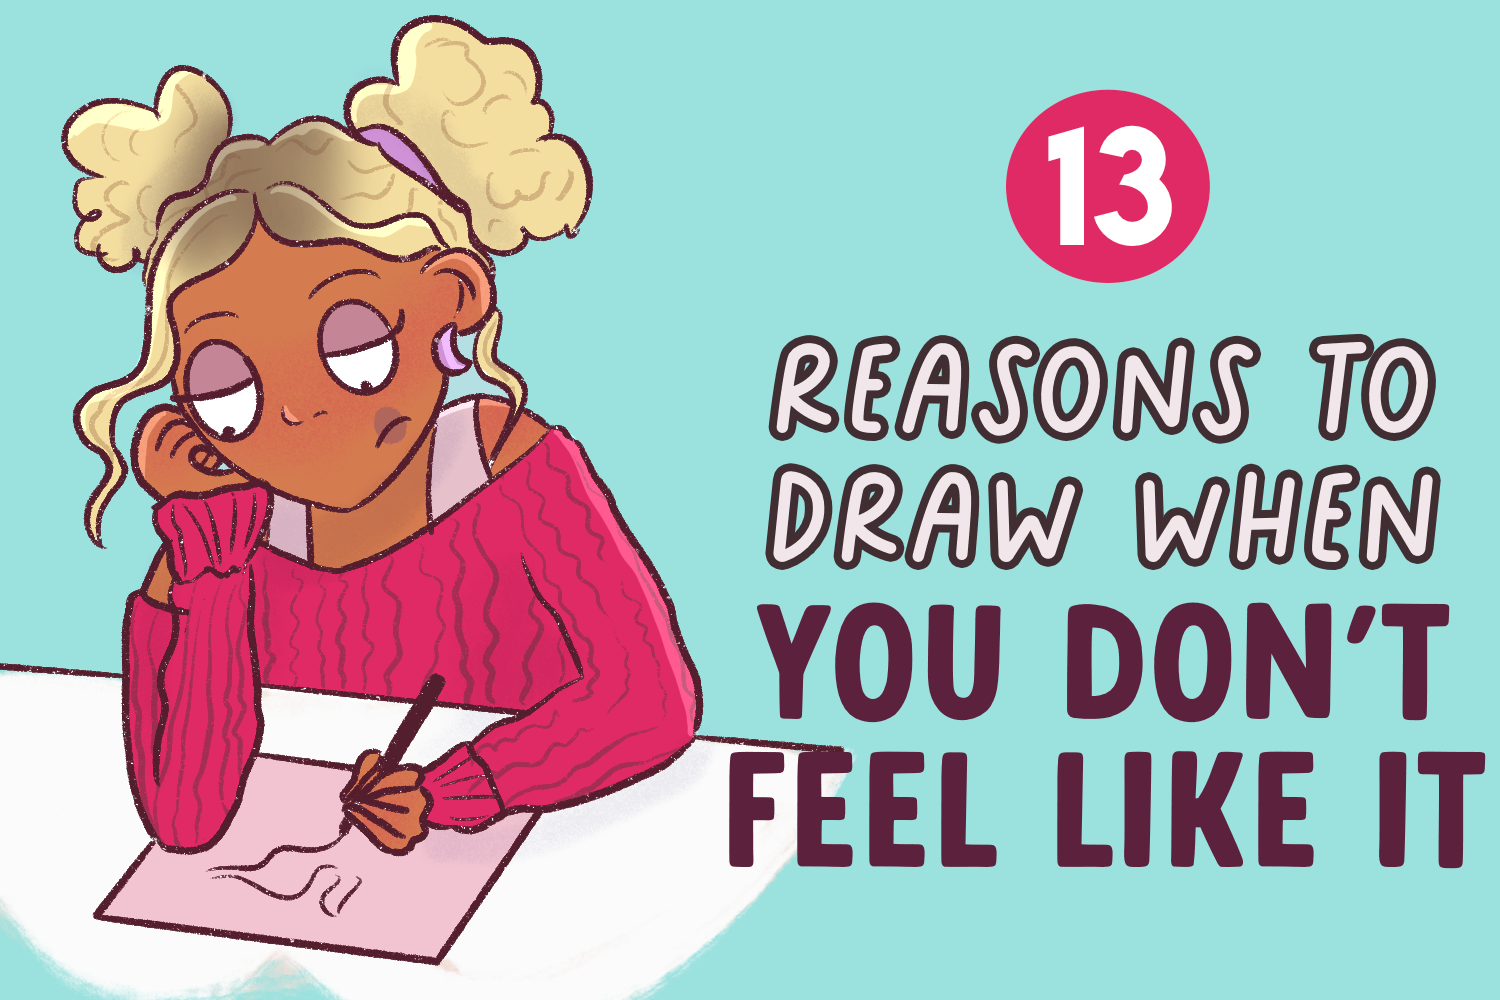 13-reasons-to-draw-when-you-don-t-feel-like-it